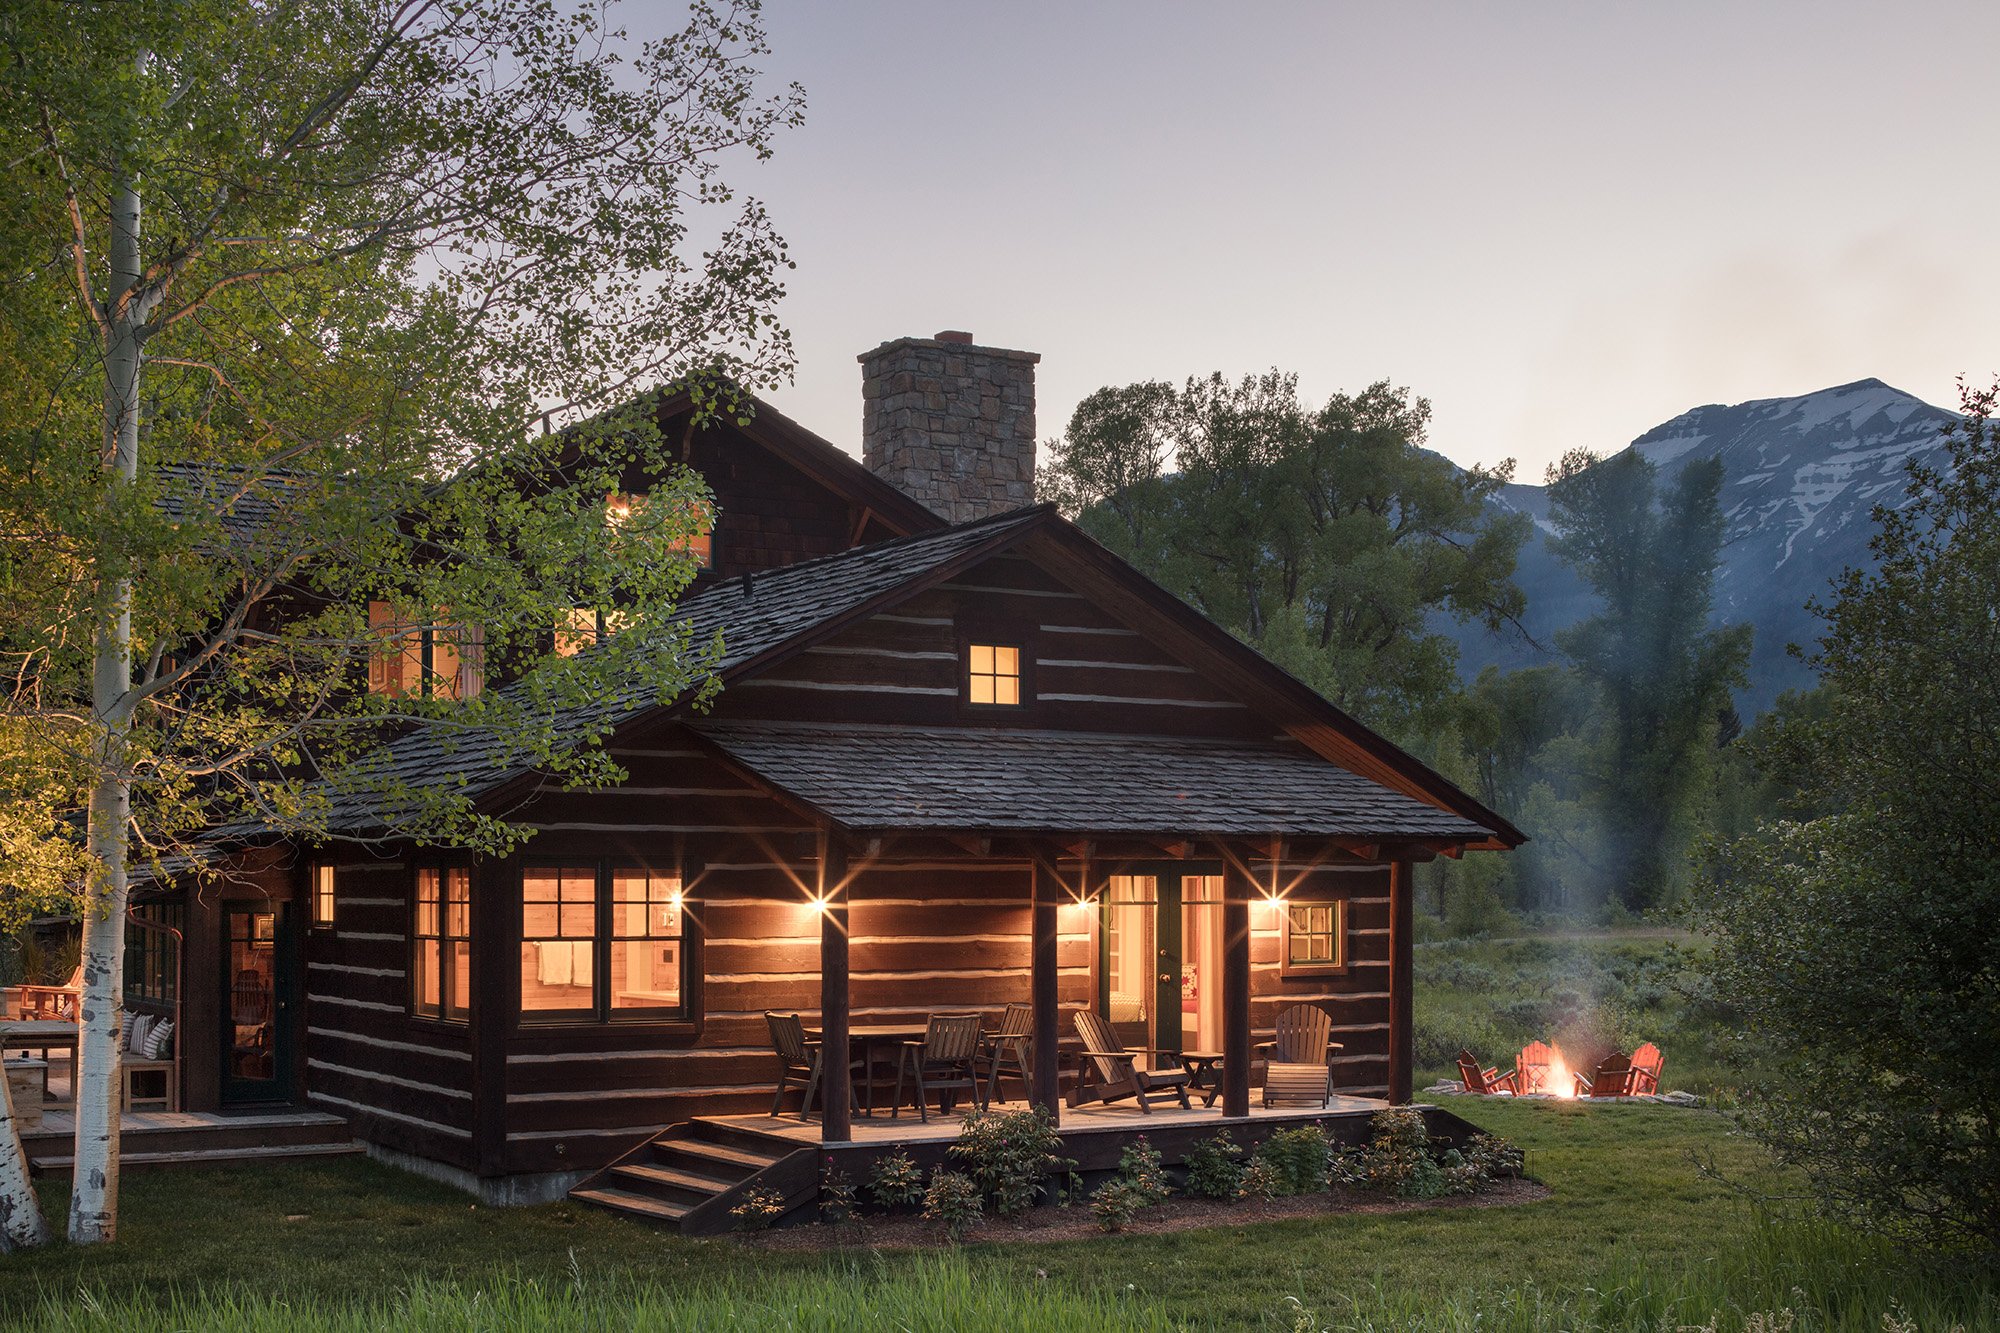 Cabin at dusk with outside firepit and mountains